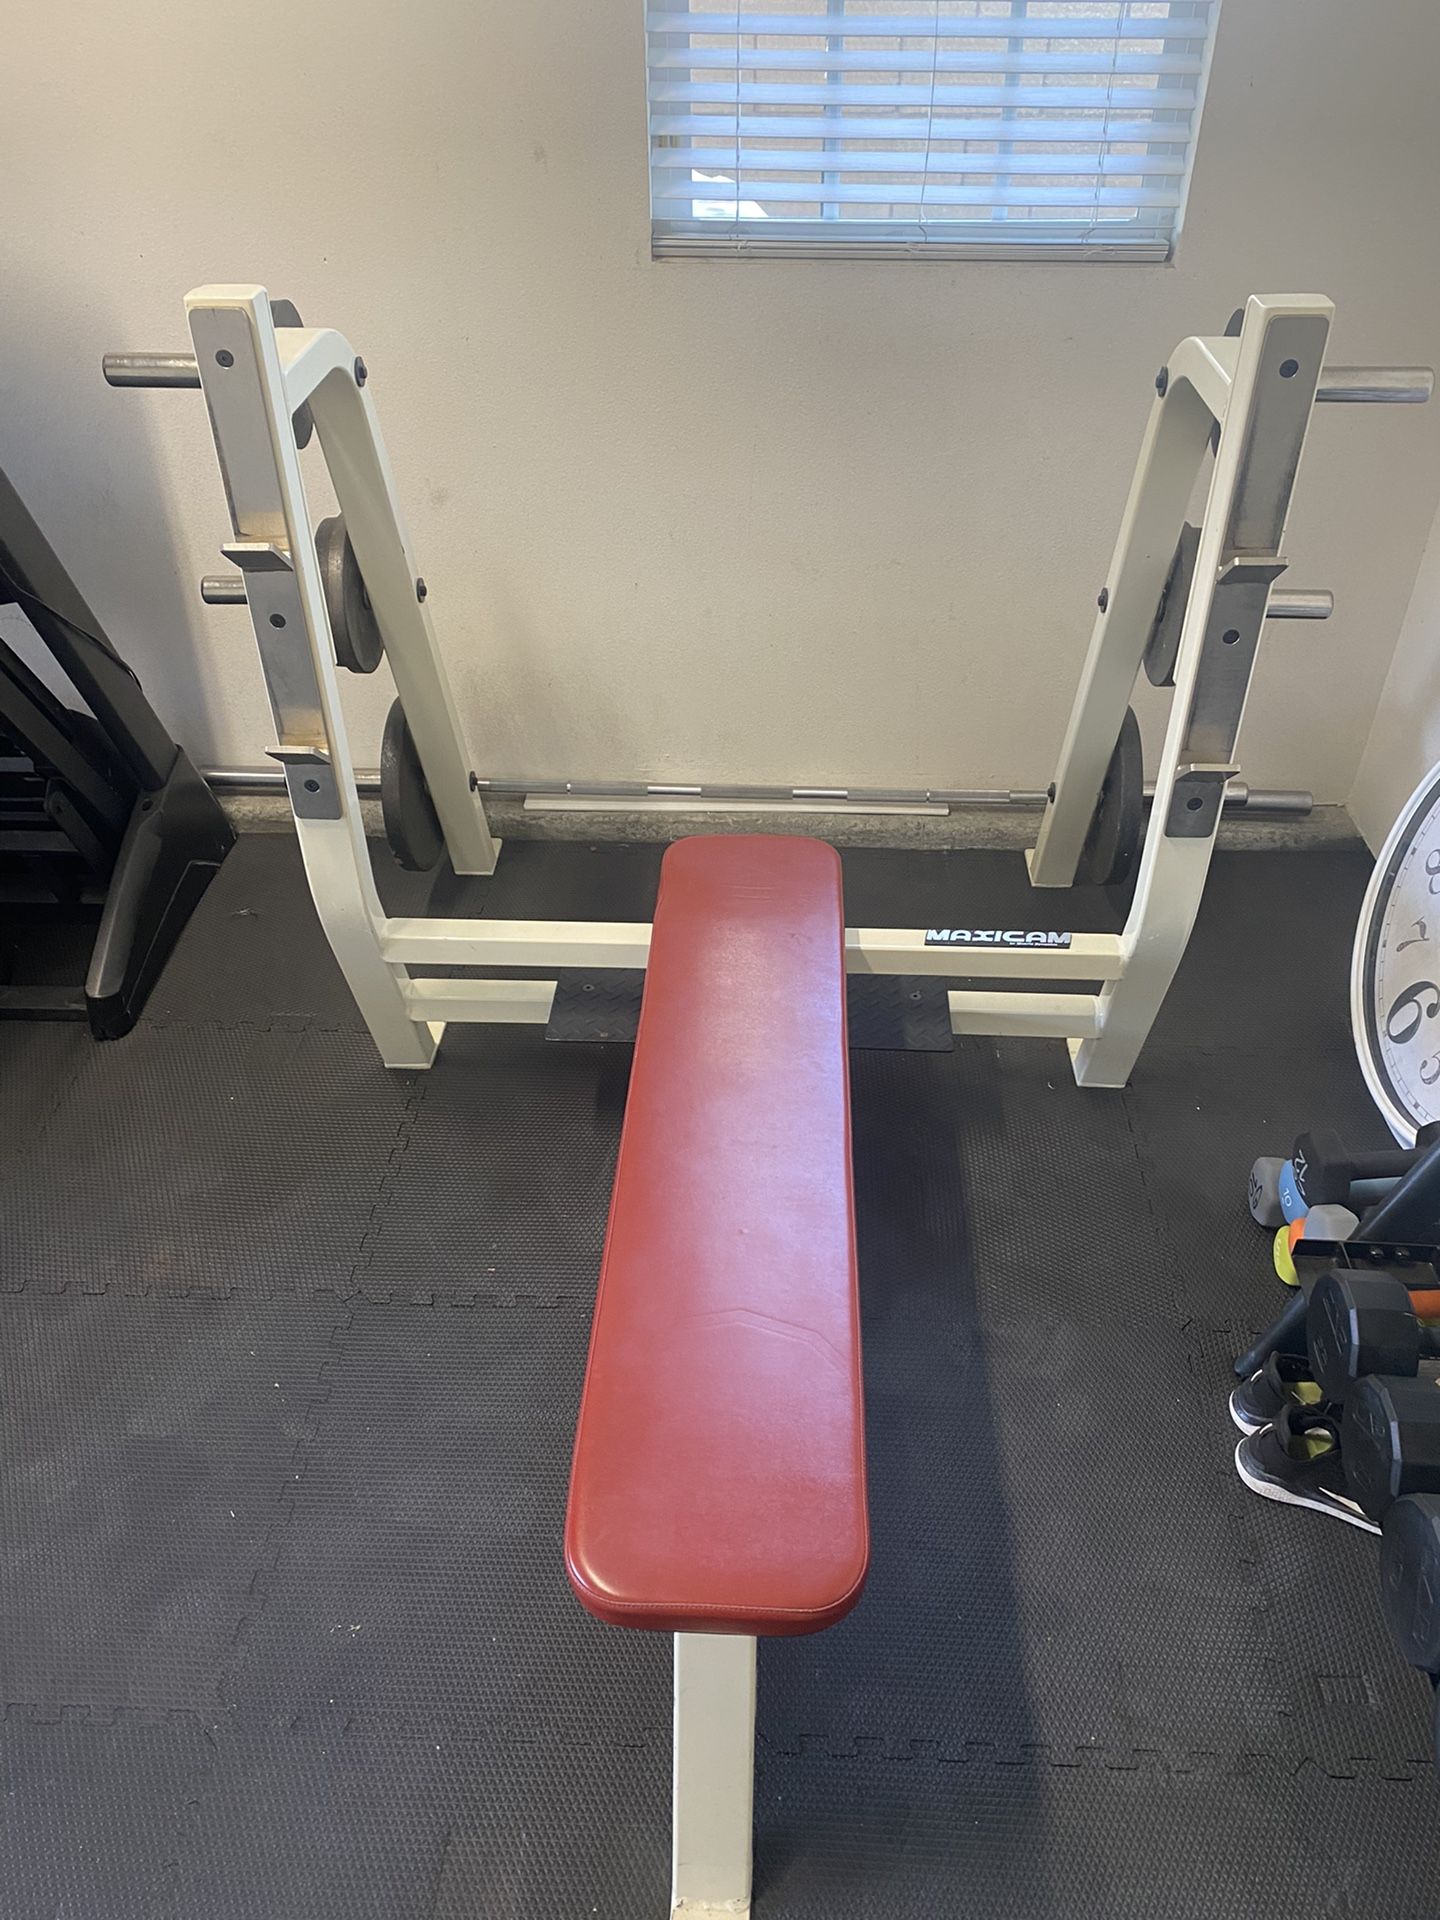 Solid Steel “Maxicam” Bench Press W/weight Holders, And Spot Plate